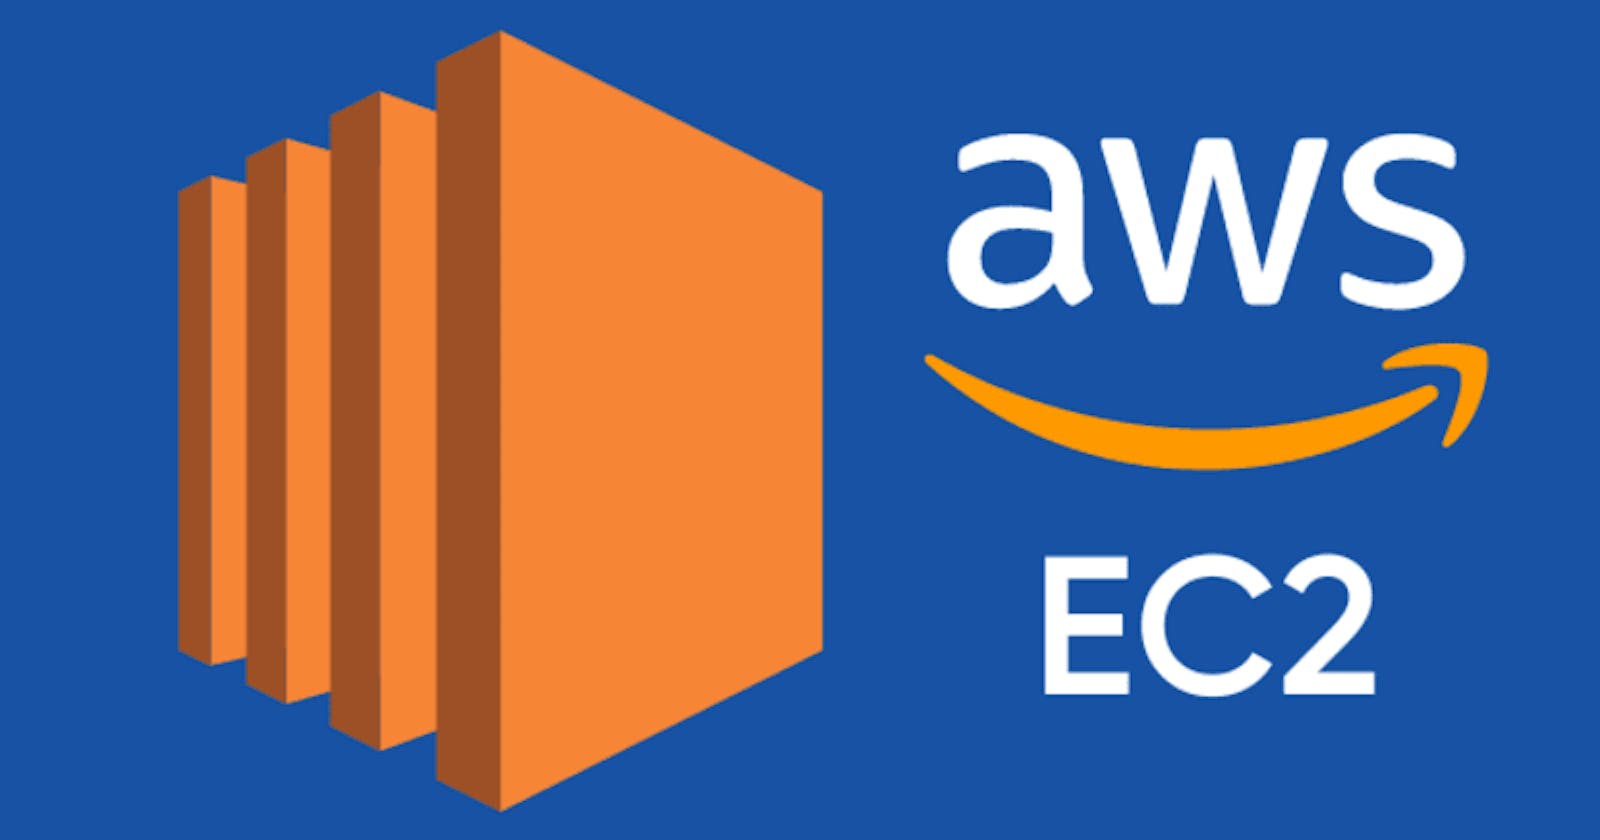 Get Started with Virtual Machines: A Step-by-Step Guide to Setting up an EC2 Instance on AWS.